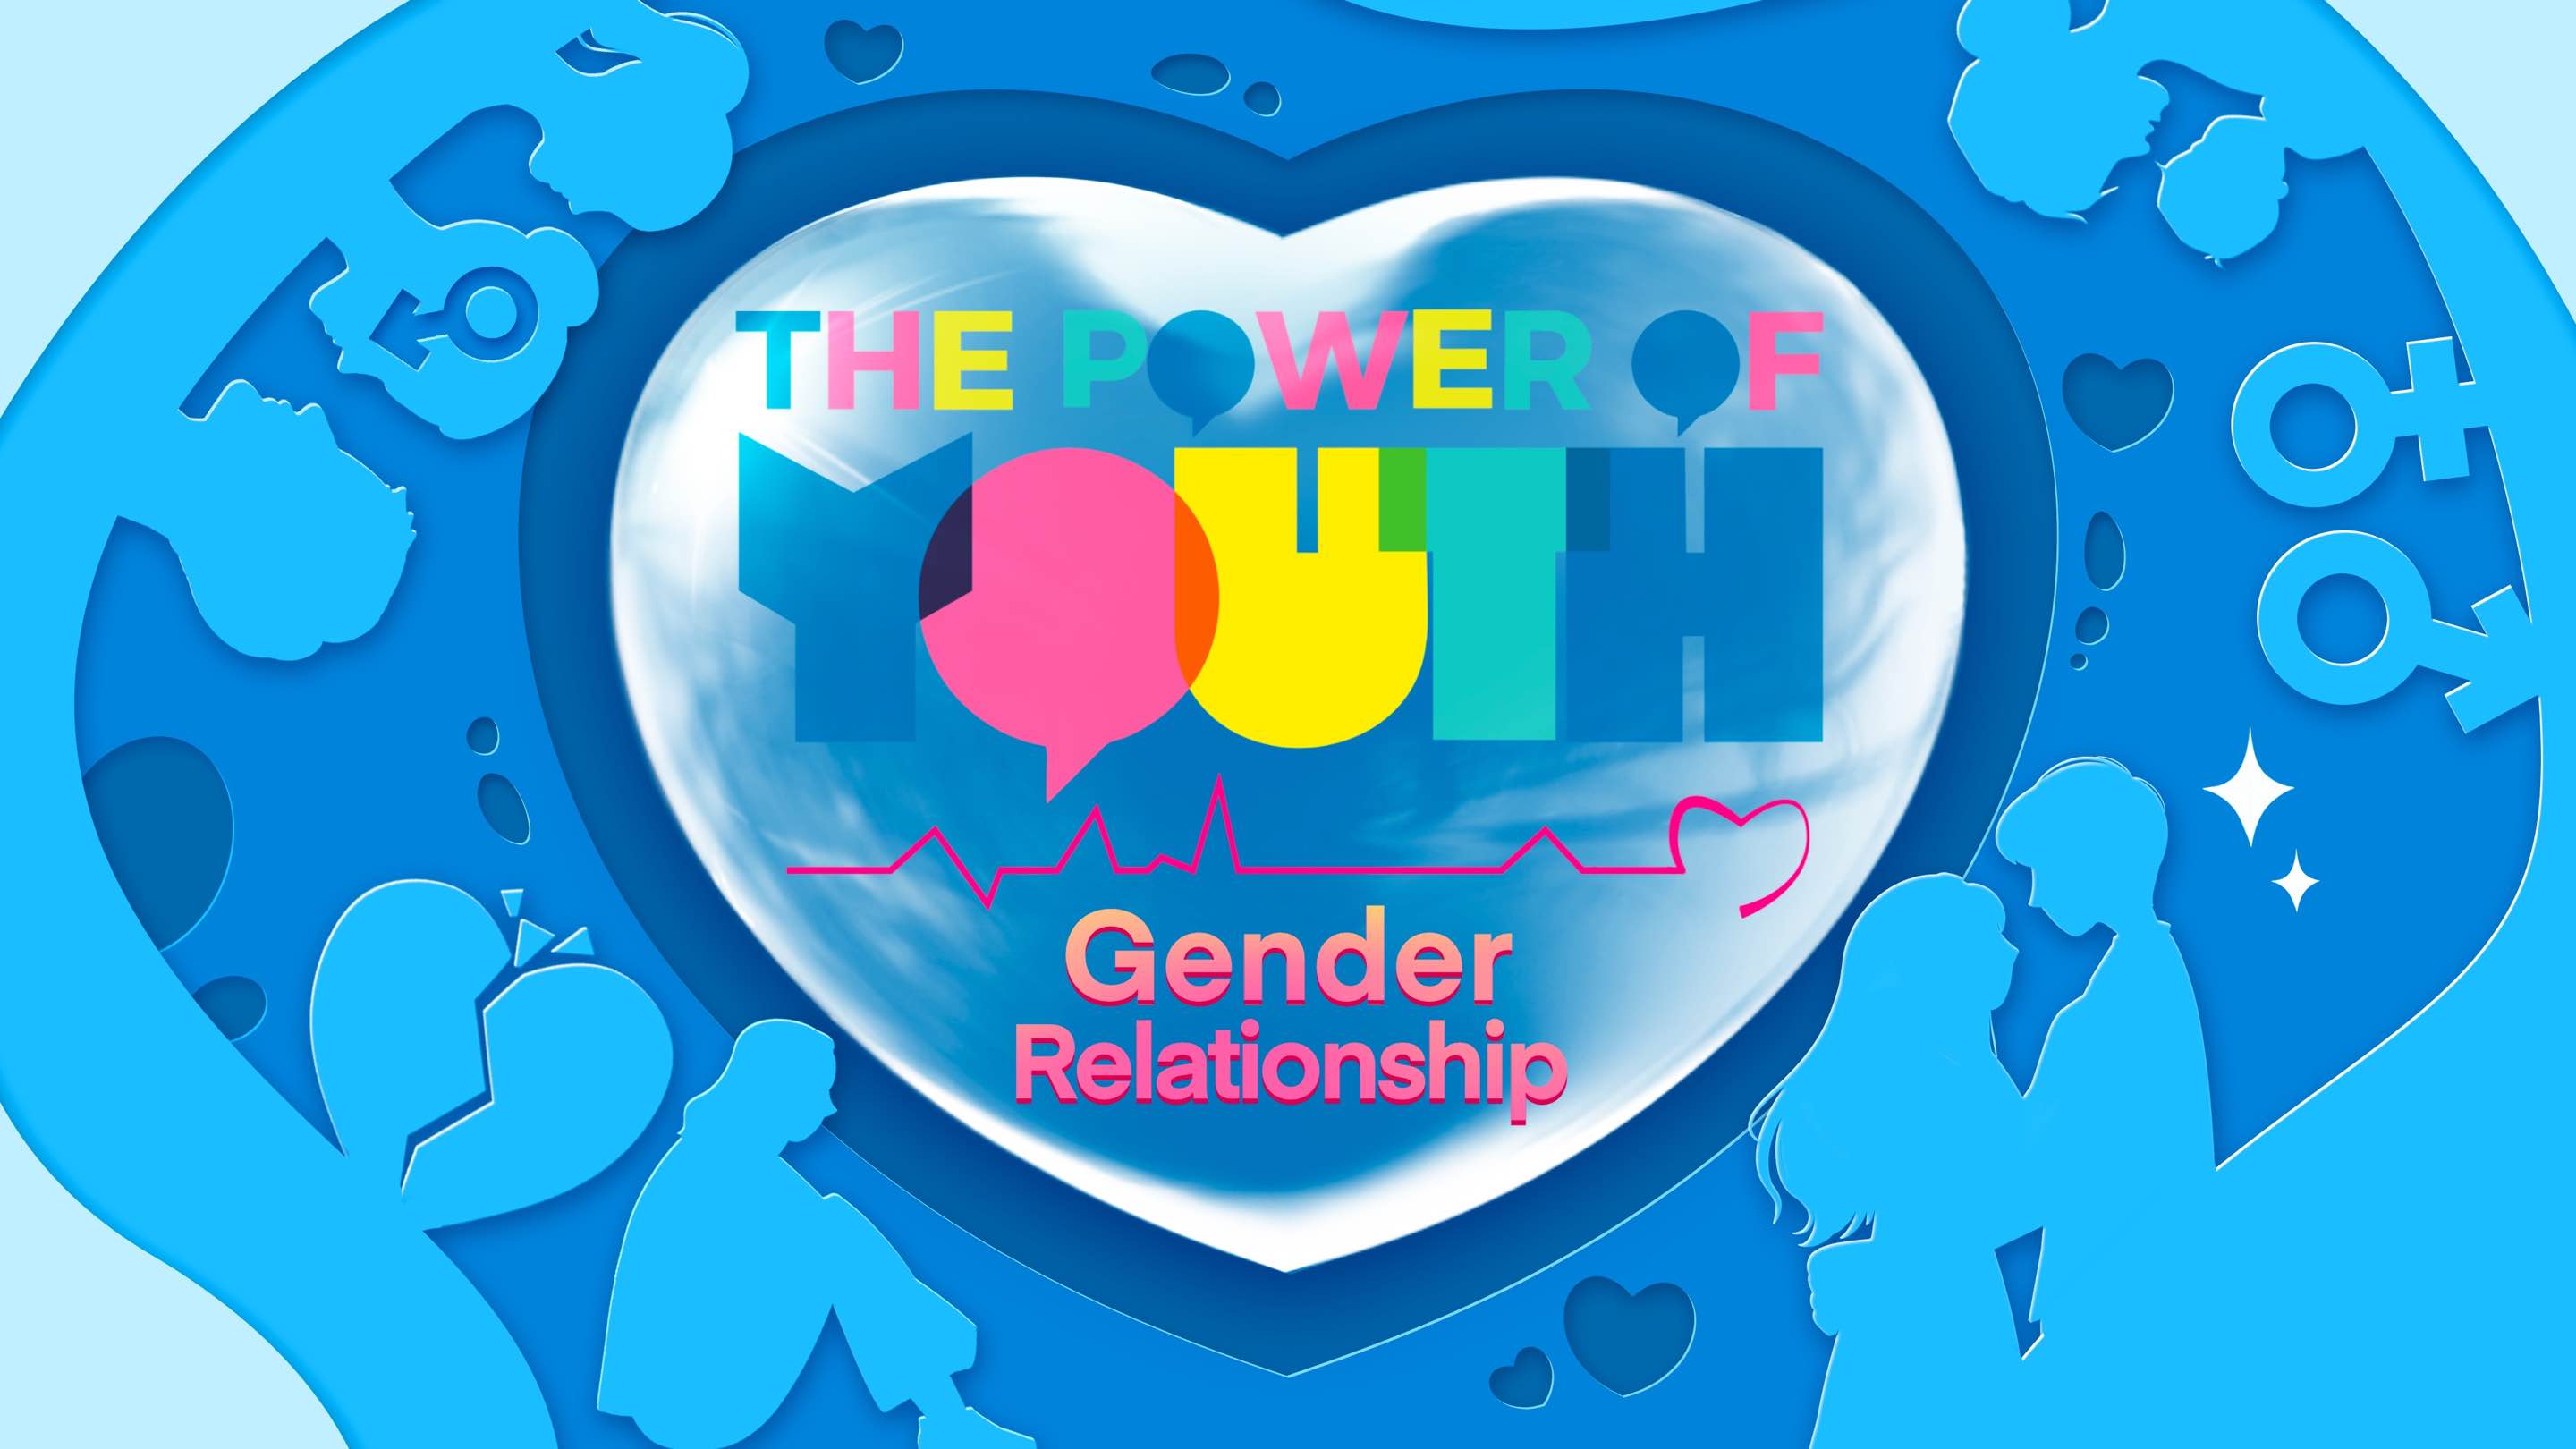 Watch: 'The Power of Youth' – Gender Relationship